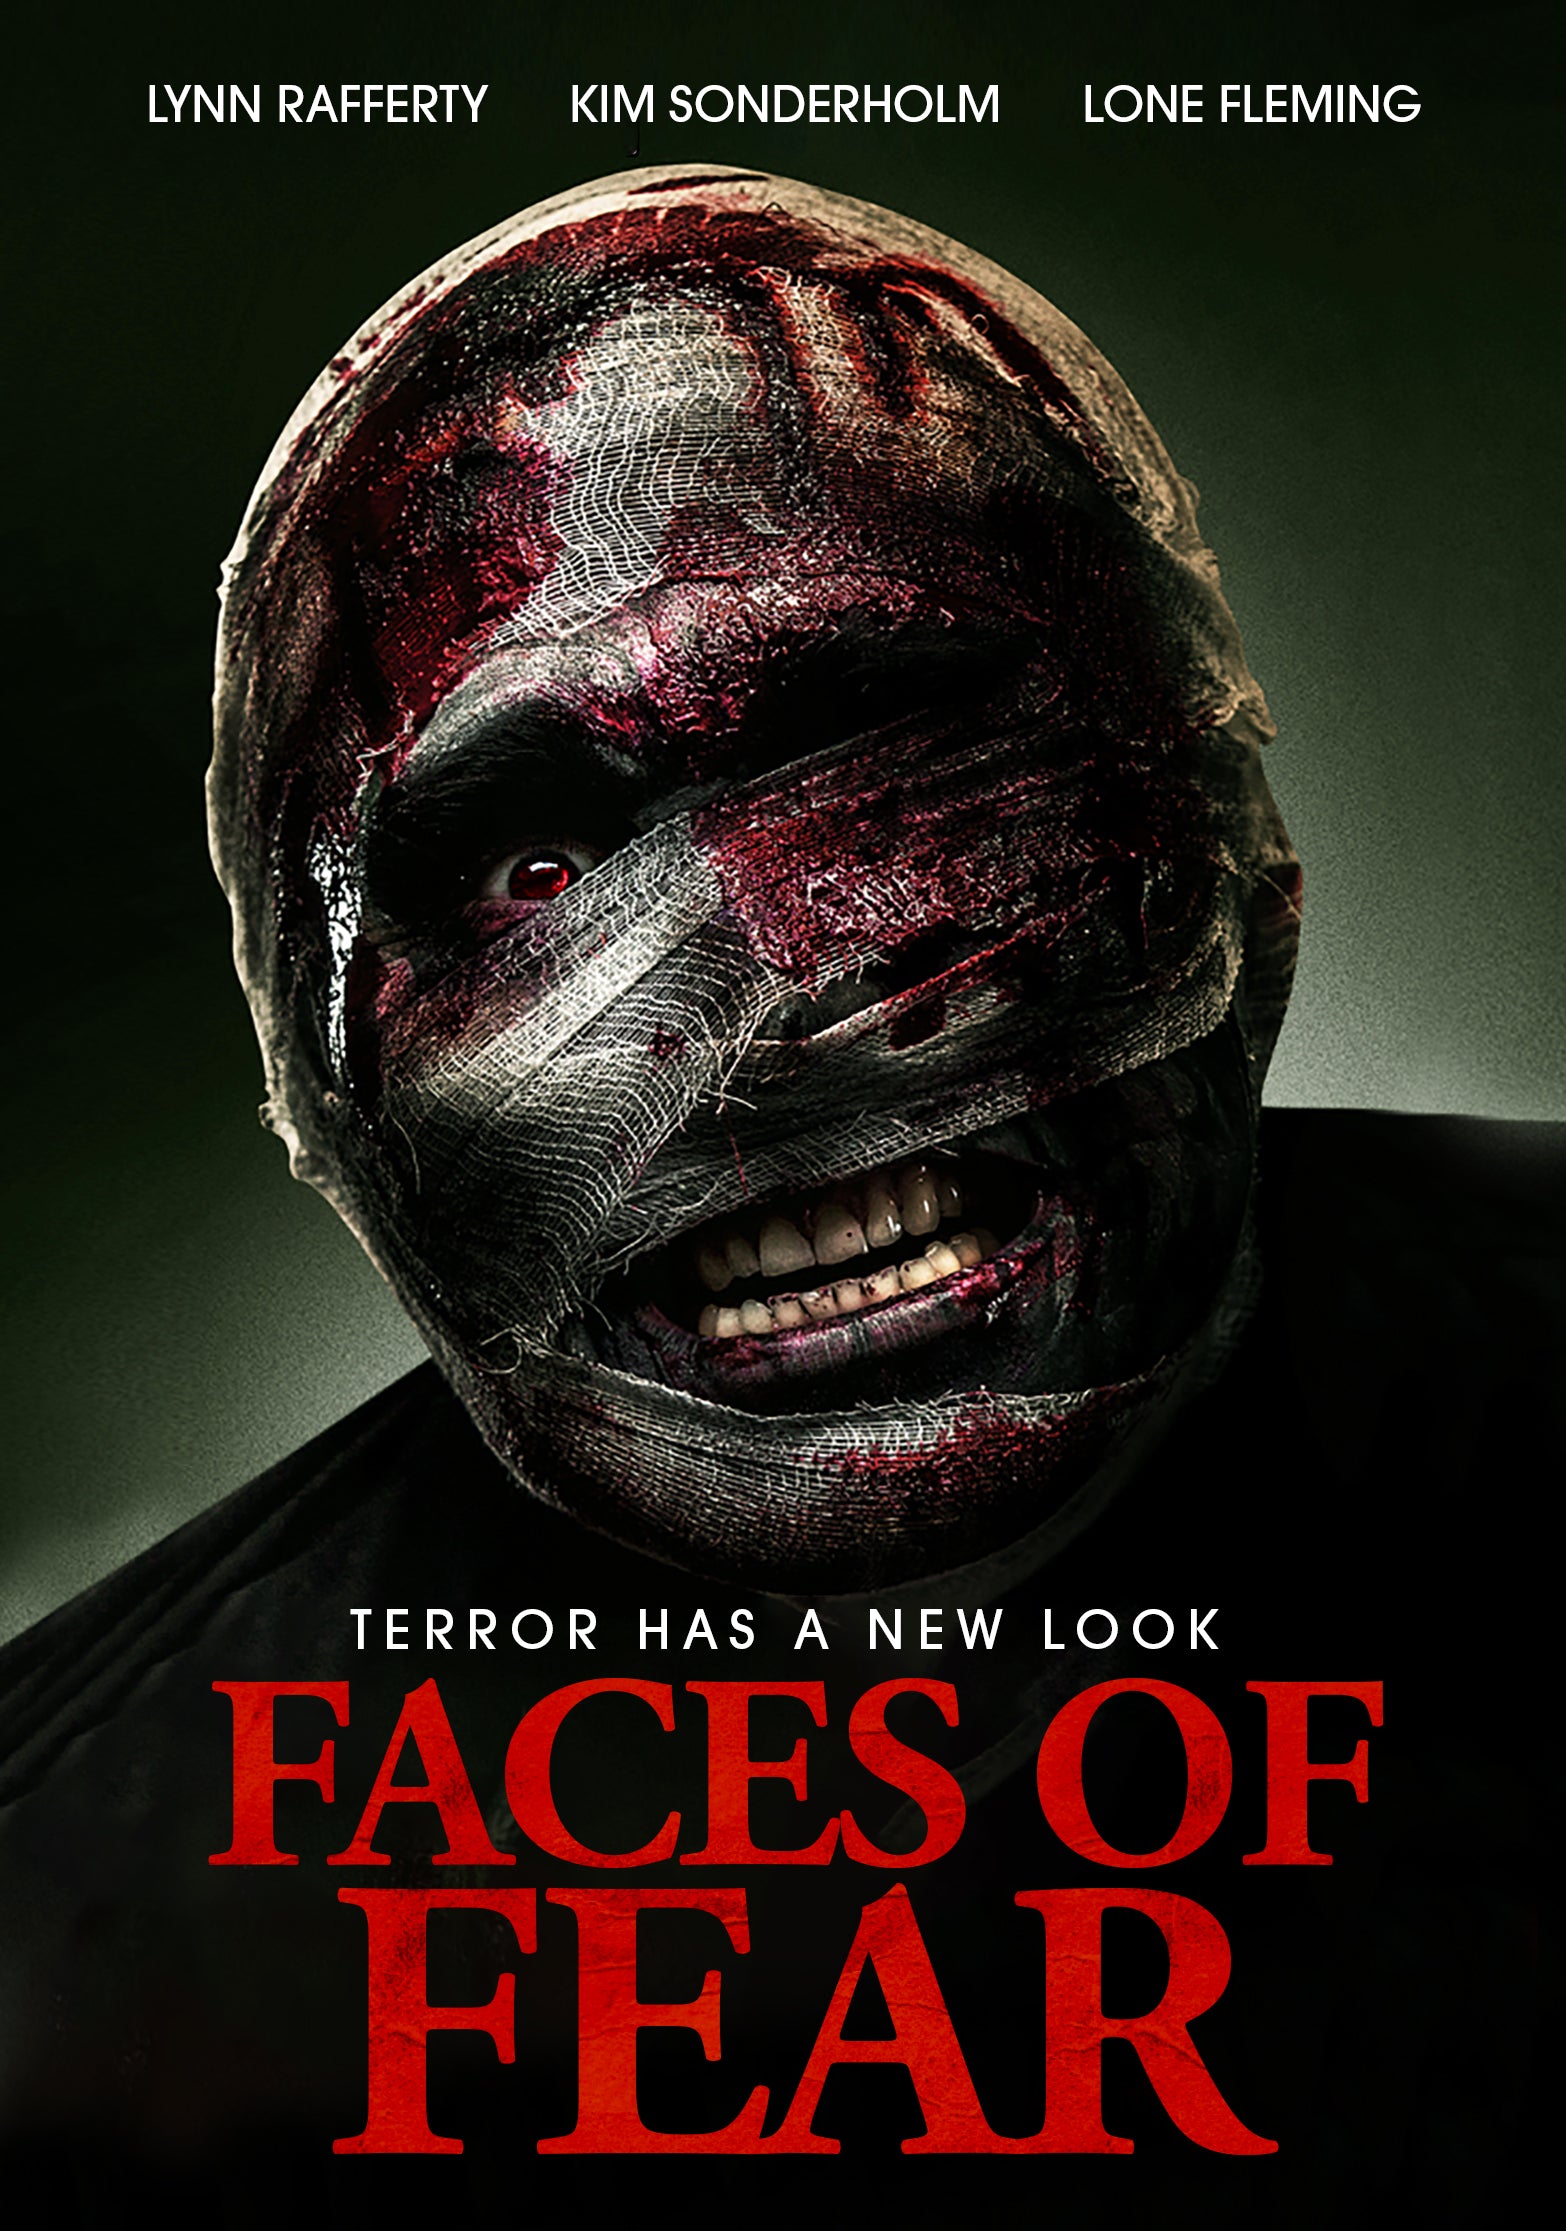 FACES OF FEAR DVD